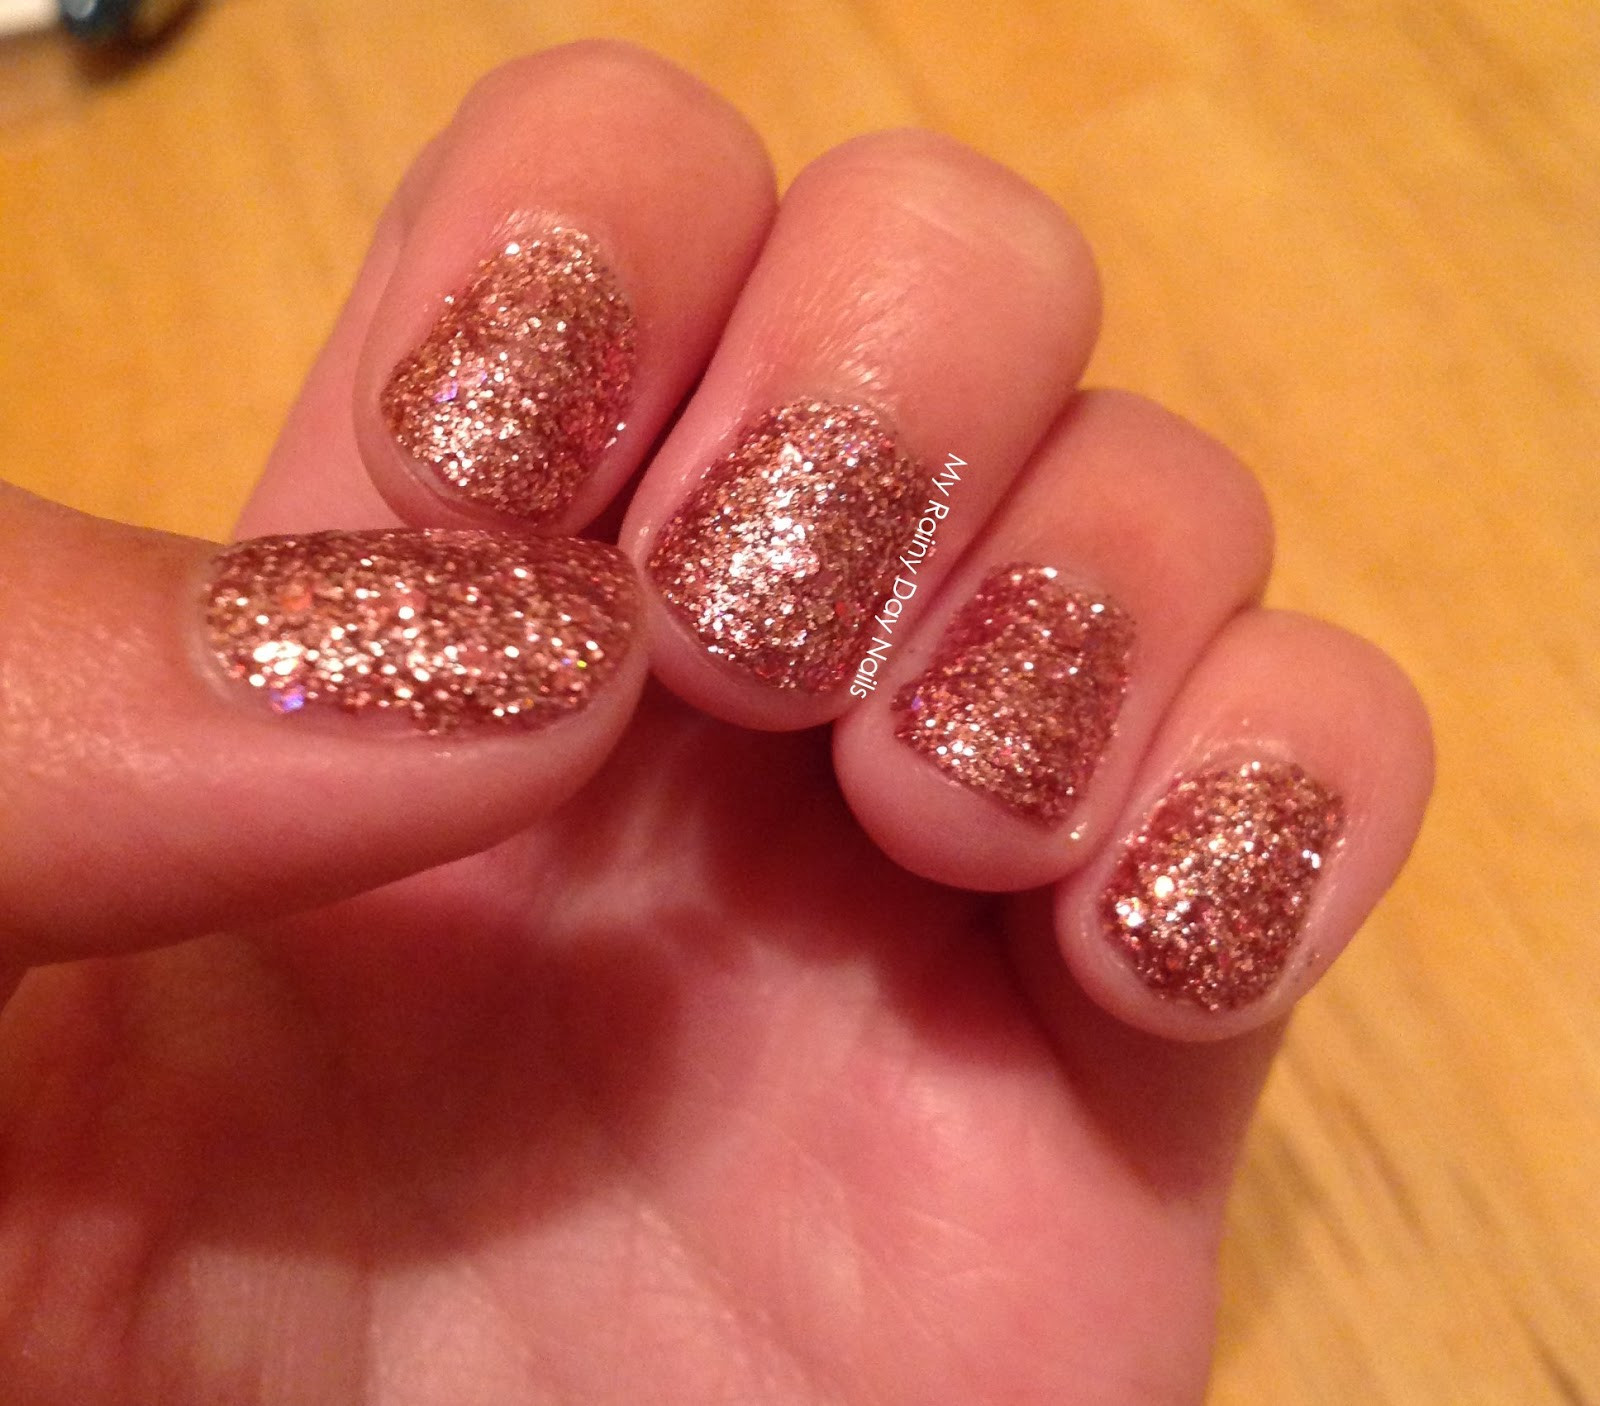 Rose Gold Glitter Nails
 My Rainy Day Nails Double Post With Rose Gold Glitter